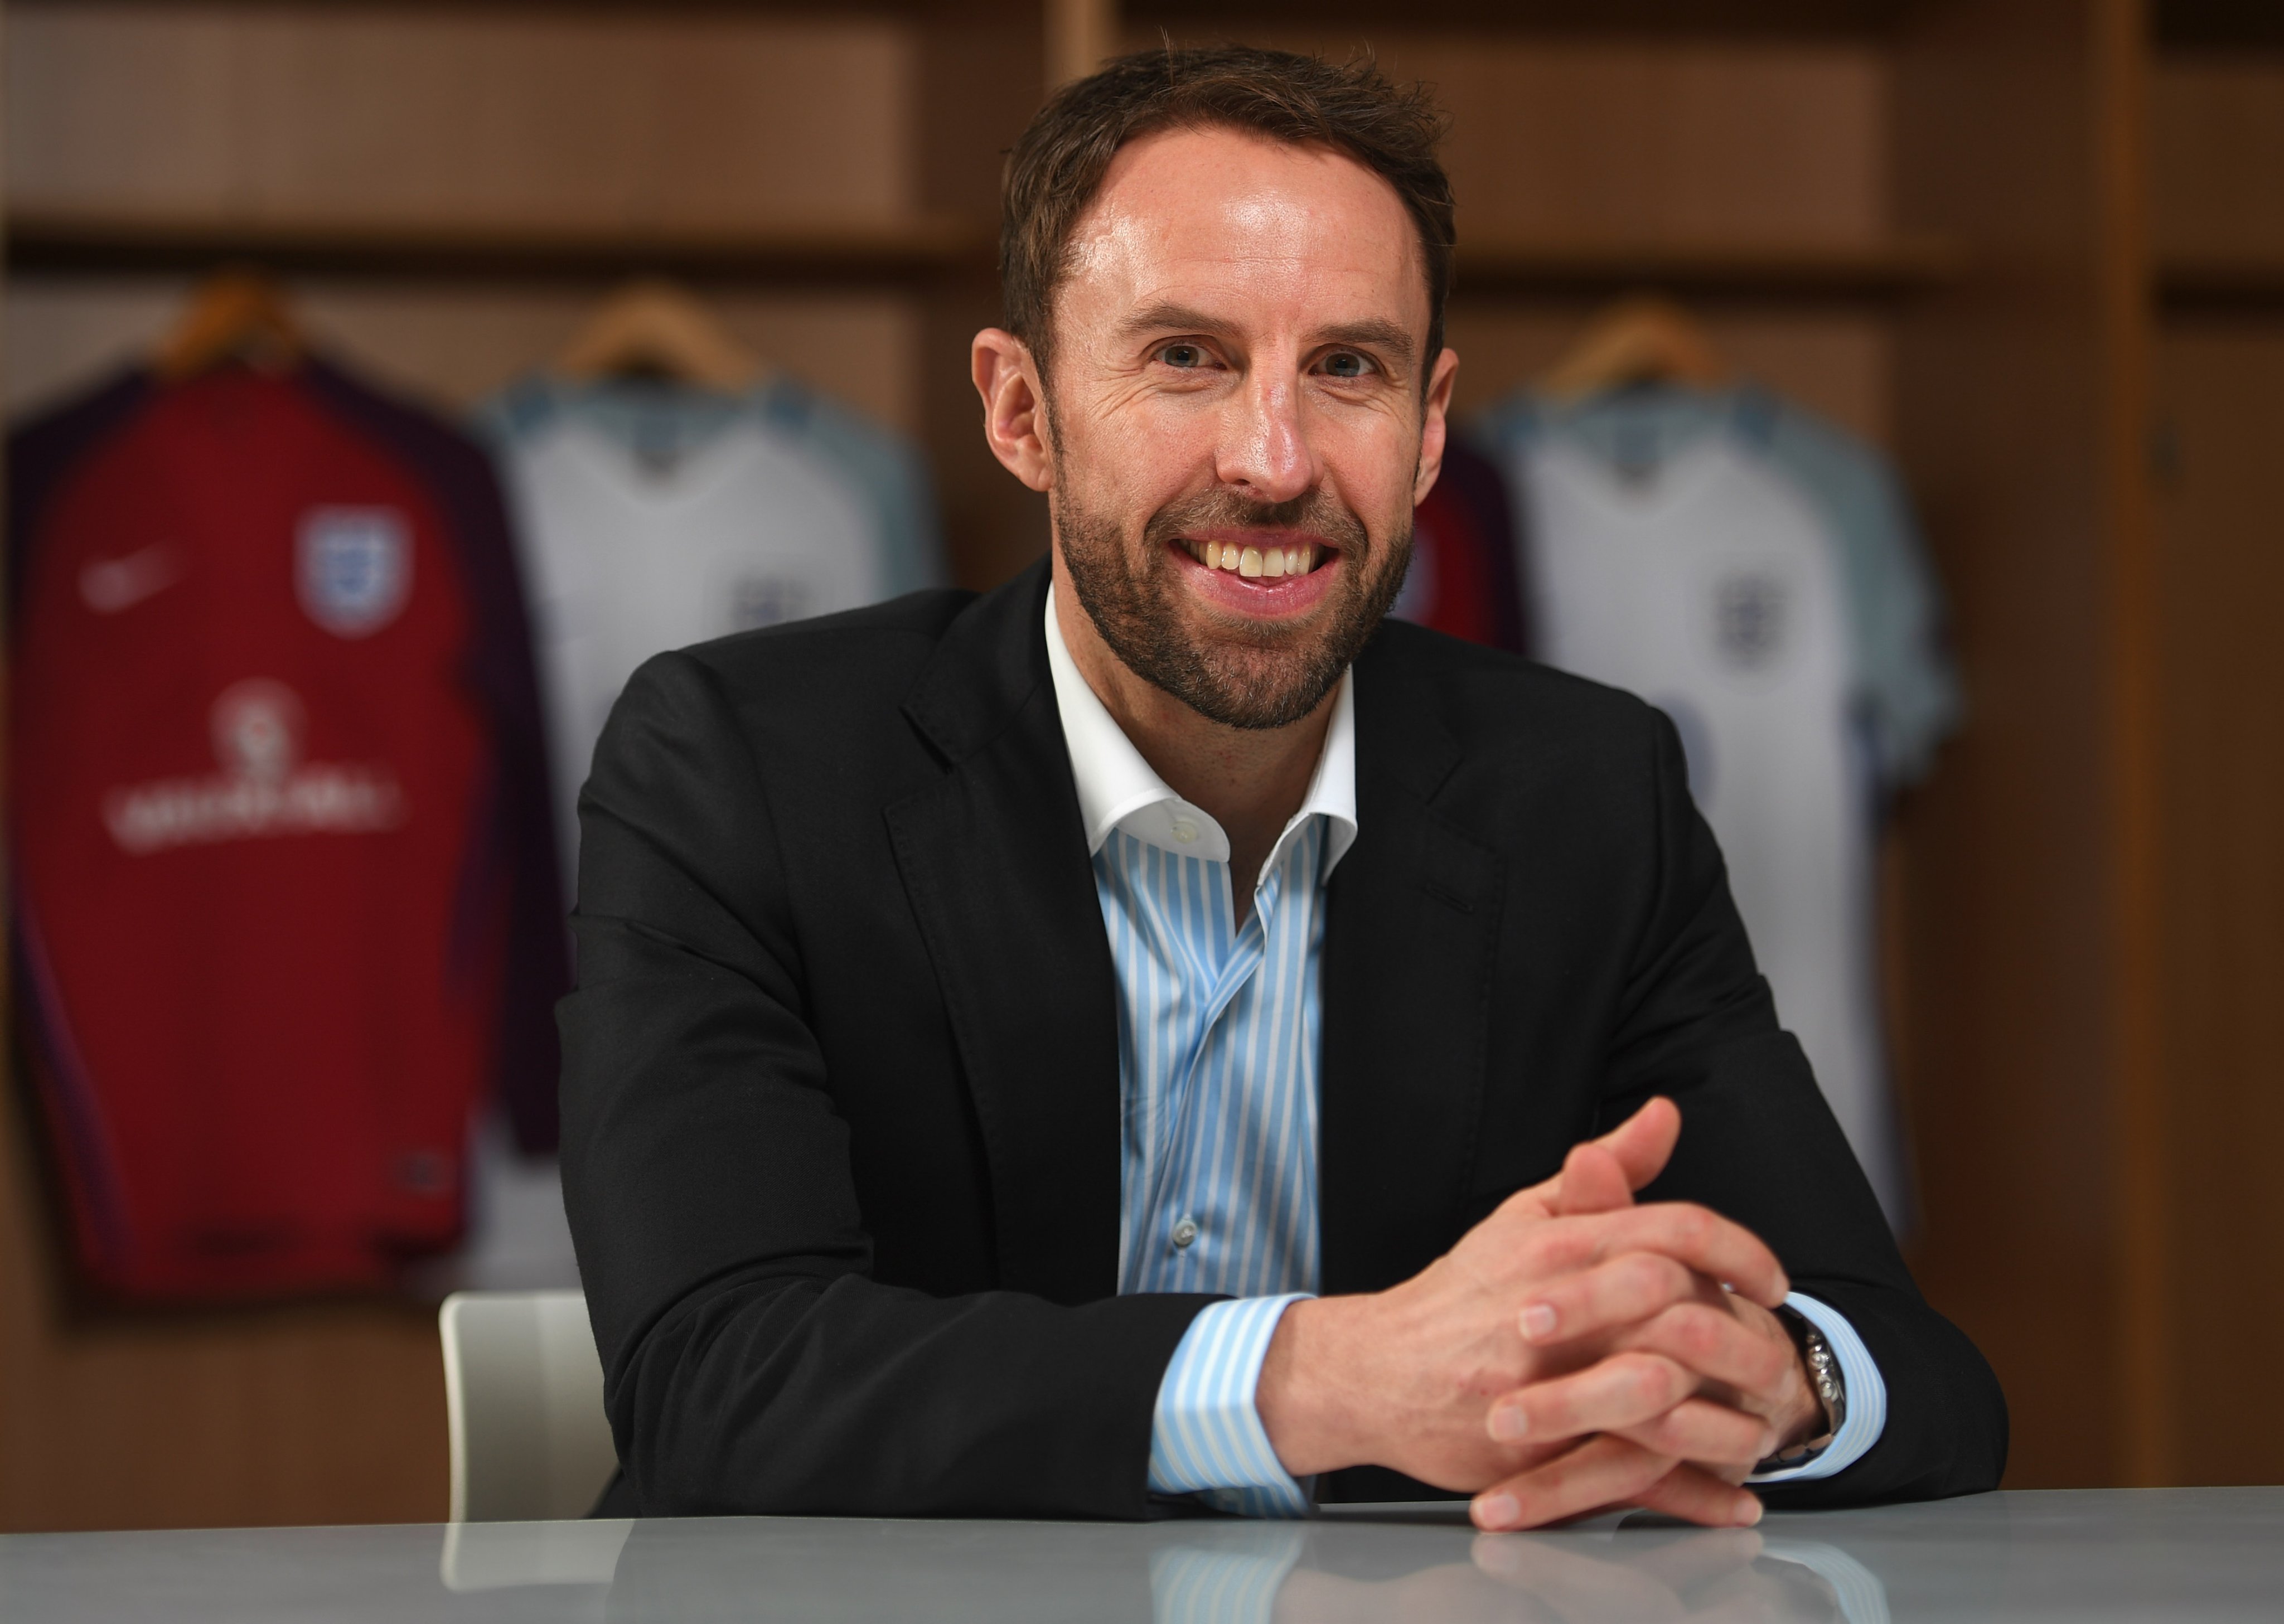 We've been consistent and are one of the teams that could win the World Cup, proclaims Gareth Southgate